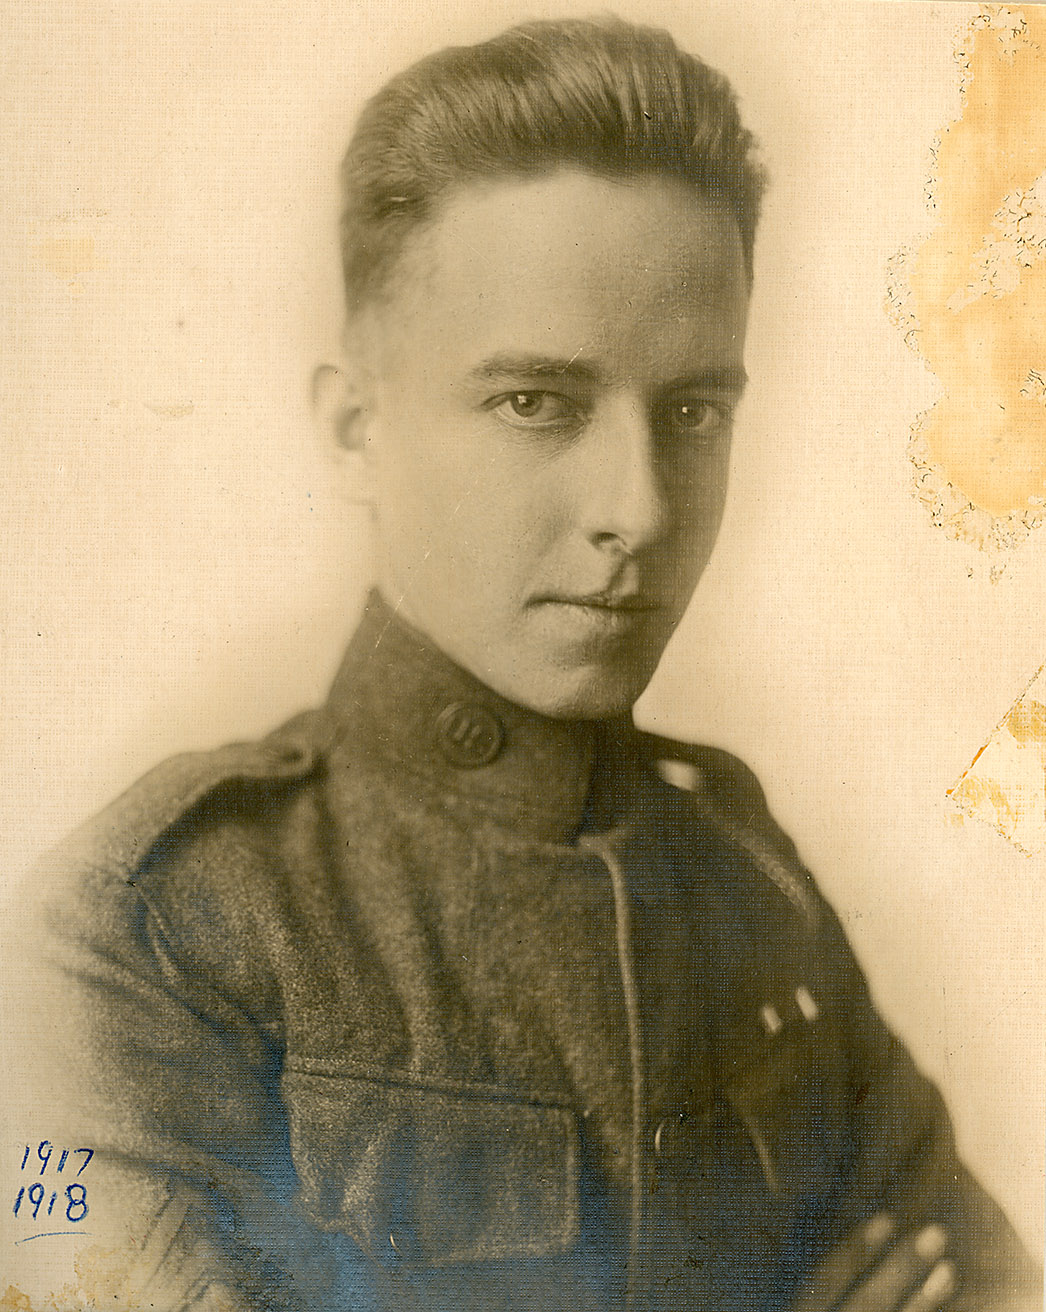 Depiction of Roswell A. Calin in uniform, 1918